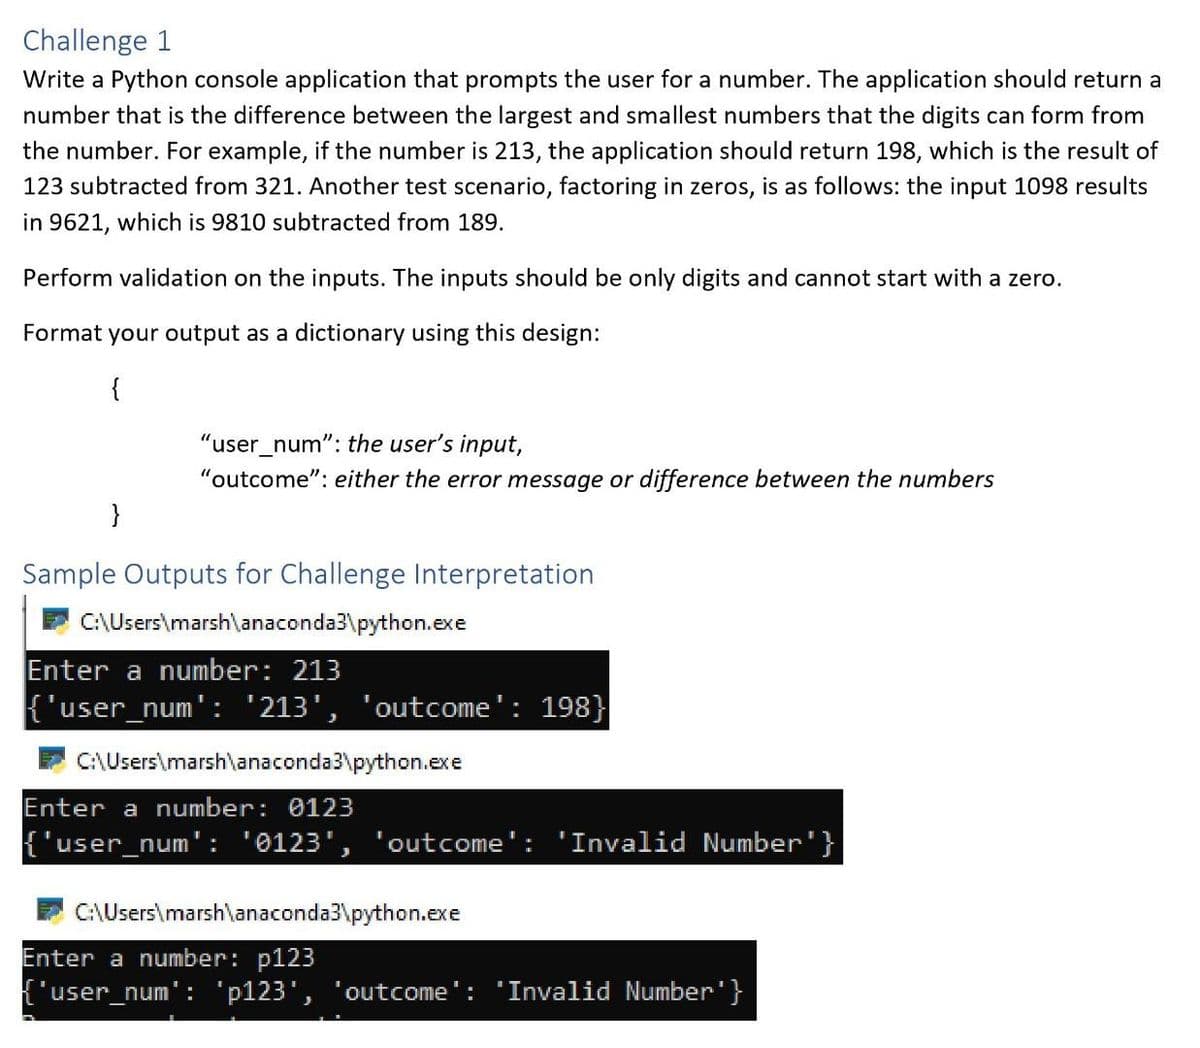 Challenge 1
Write a Python console application that prompts the user for a number. The application should return a
number that is the difference between the largest and smallest numbers that the digits can form from
the number. For example, if the number is 213, the application should return 198, which is the result of
123 subtracted from 321. Another test scenario, factoring in zeros, is as follows: the input 1098 results
in 9621, which is 9810 subtracted from 189.
Perform validation on the inputs. The inputs should be only digits and cannot start with a zero.
Format your output as a dictionary using this design:
"user_num": the user's input,
"outcome": either the error message or difference between the numbers
}
Sample Outputs for Challenge Interpretation
C:\Users\marsh\anaconda3\python.exe
Enter a number: 213
{'user_num': '213', 'outcome': 198}
C:\Users\marsh\anaconda3\python.exe
Enter a number: 0123
{"user_num': '0123', 'outcome': 'Invalid Number"}
C:\Users\marsh\anaconda3\python.exe
Enter a number: p123
['user_num': 'p123', 'outcome
'Invalid Number'}